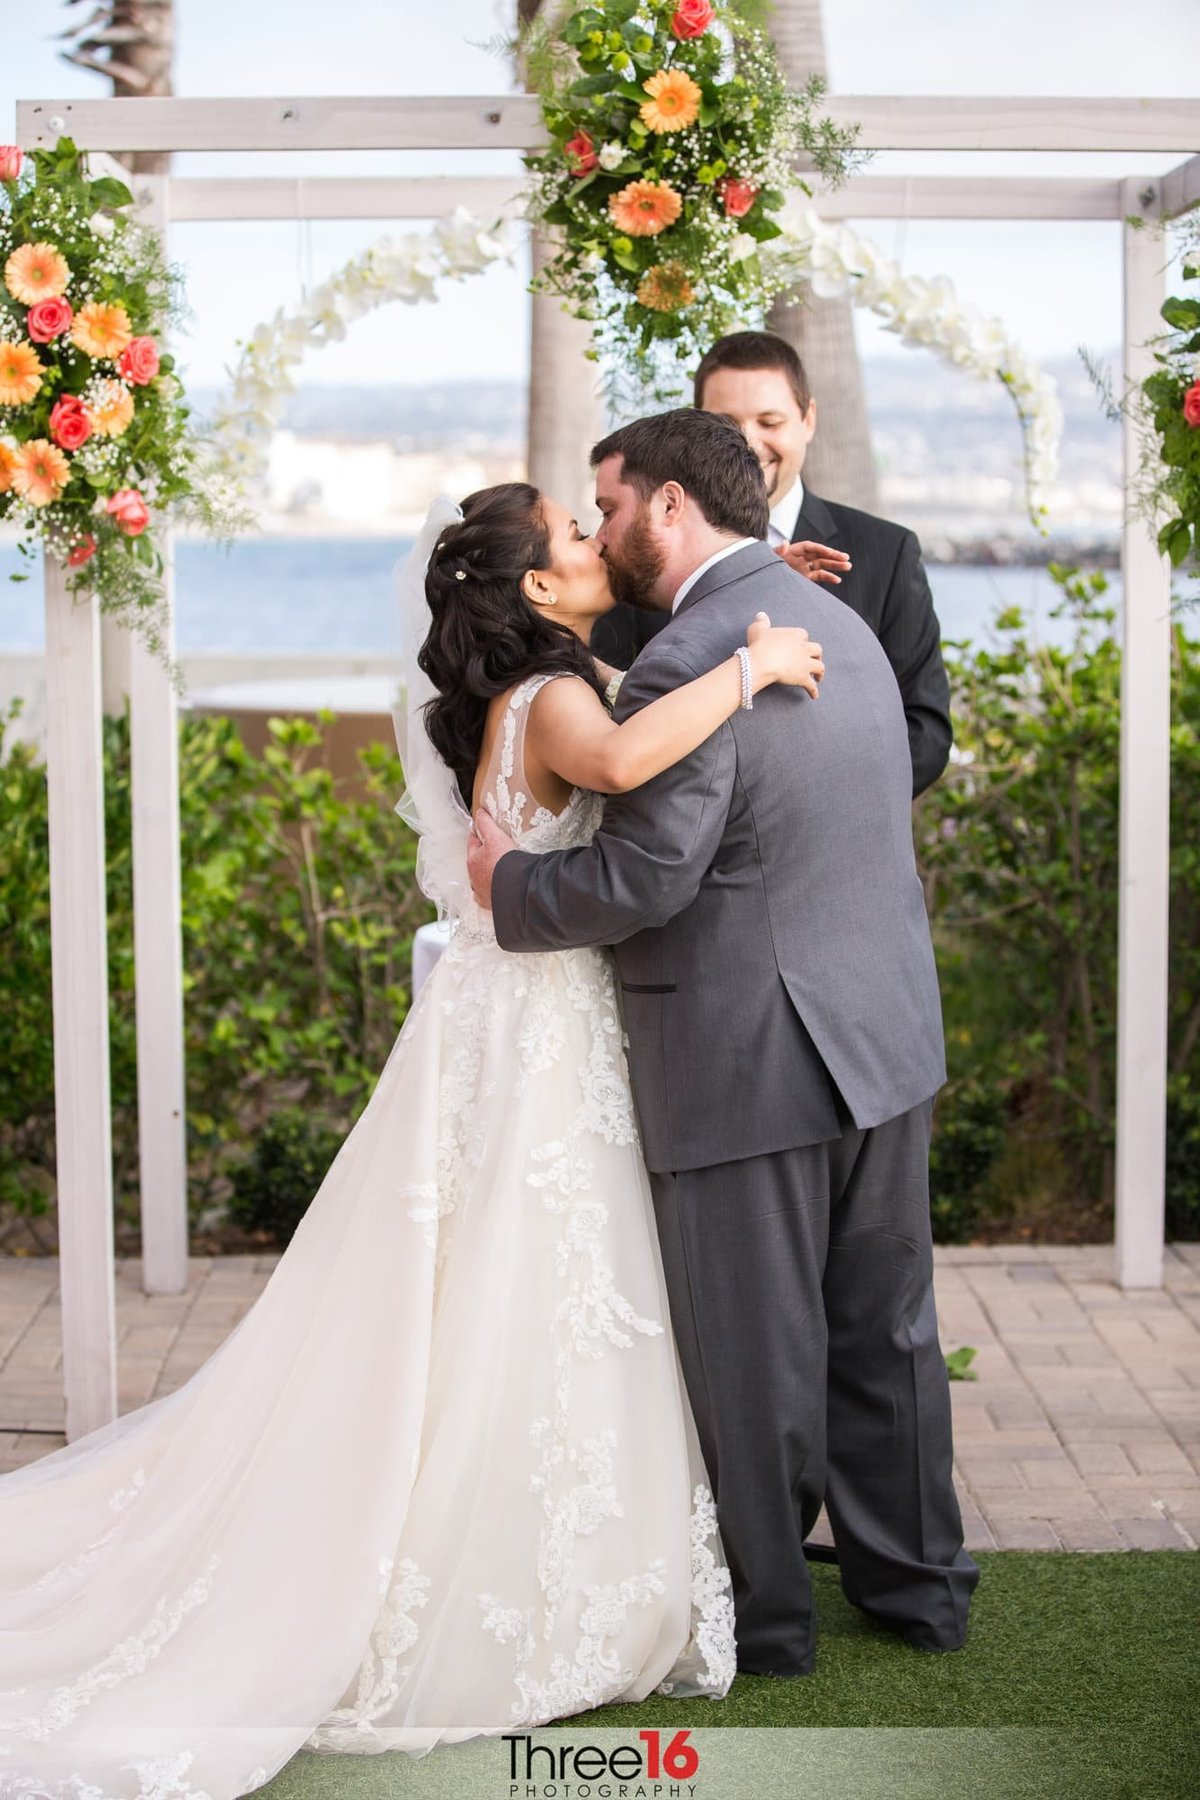 Bride and Groom share their first kiss at the altar